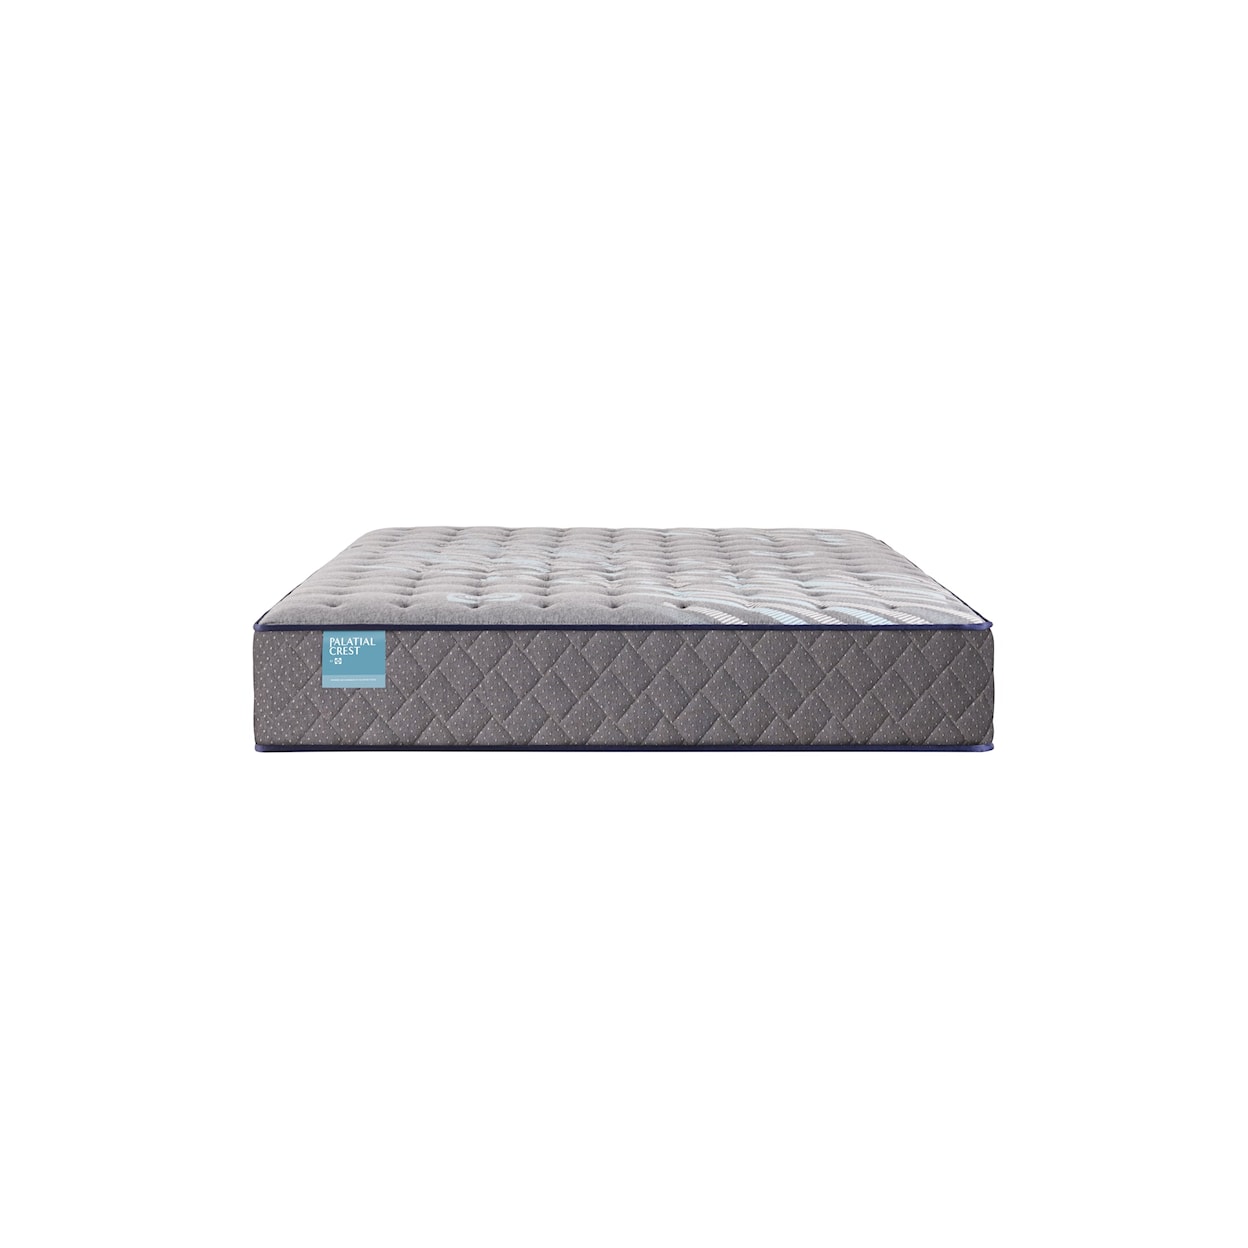 Sealy Palatial Crest S6 Cathedral Cove Firm TT Double Mattress